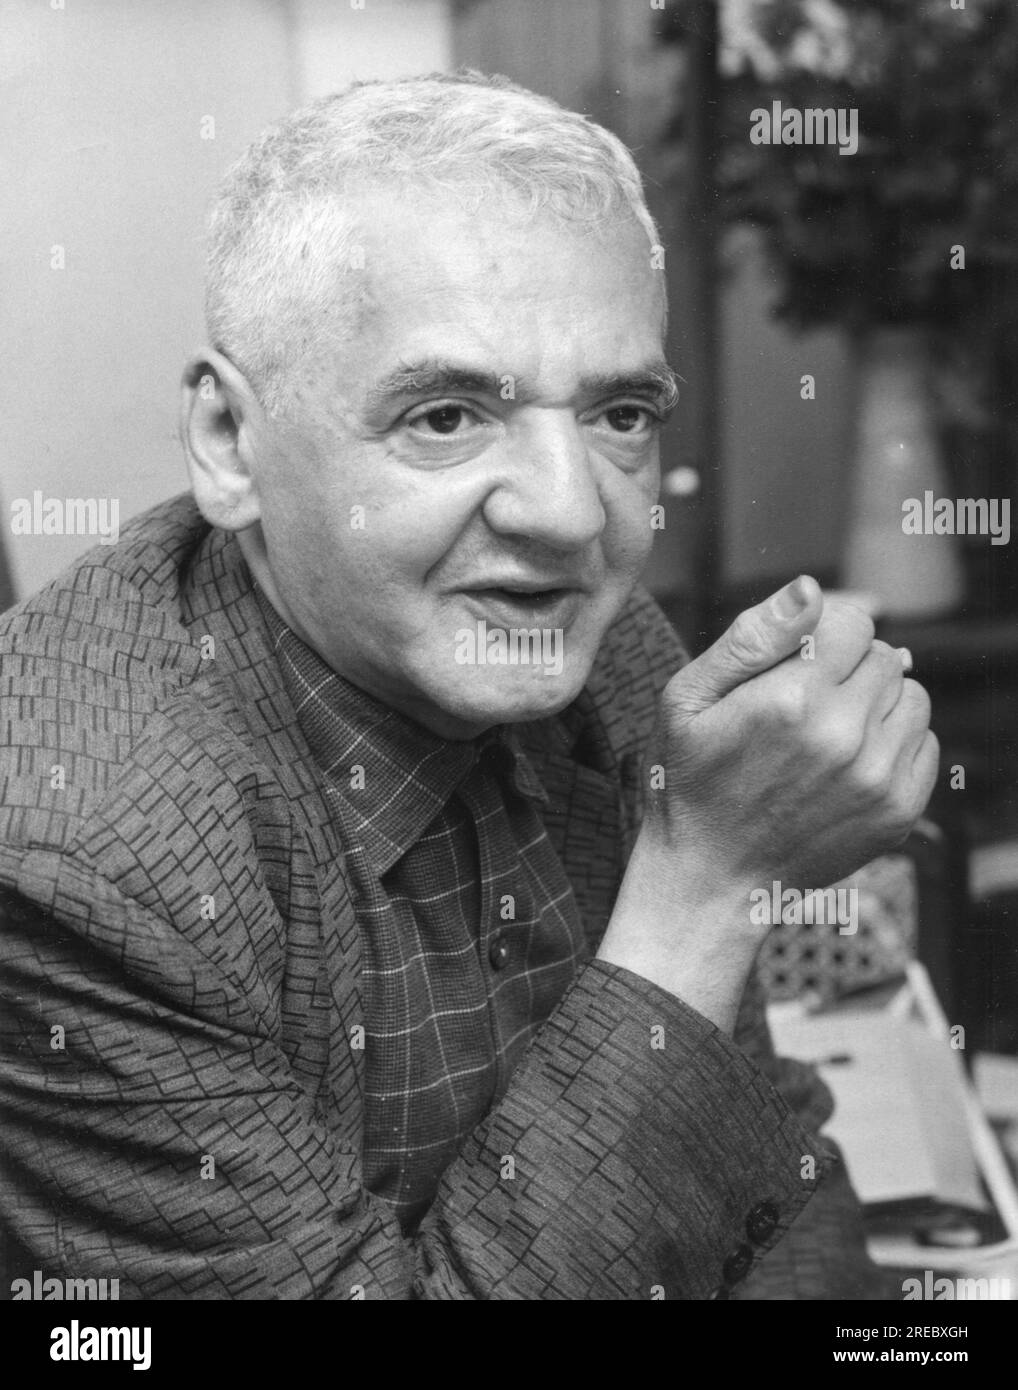 Weegee (Arthur Fellig), 12.6.1899 - 25.12.1968, American photographer, 1950s, ADDITIONAL-RIGHTS-CLEARANCE-INFO-NOT-AVAILABLE Stock Photo